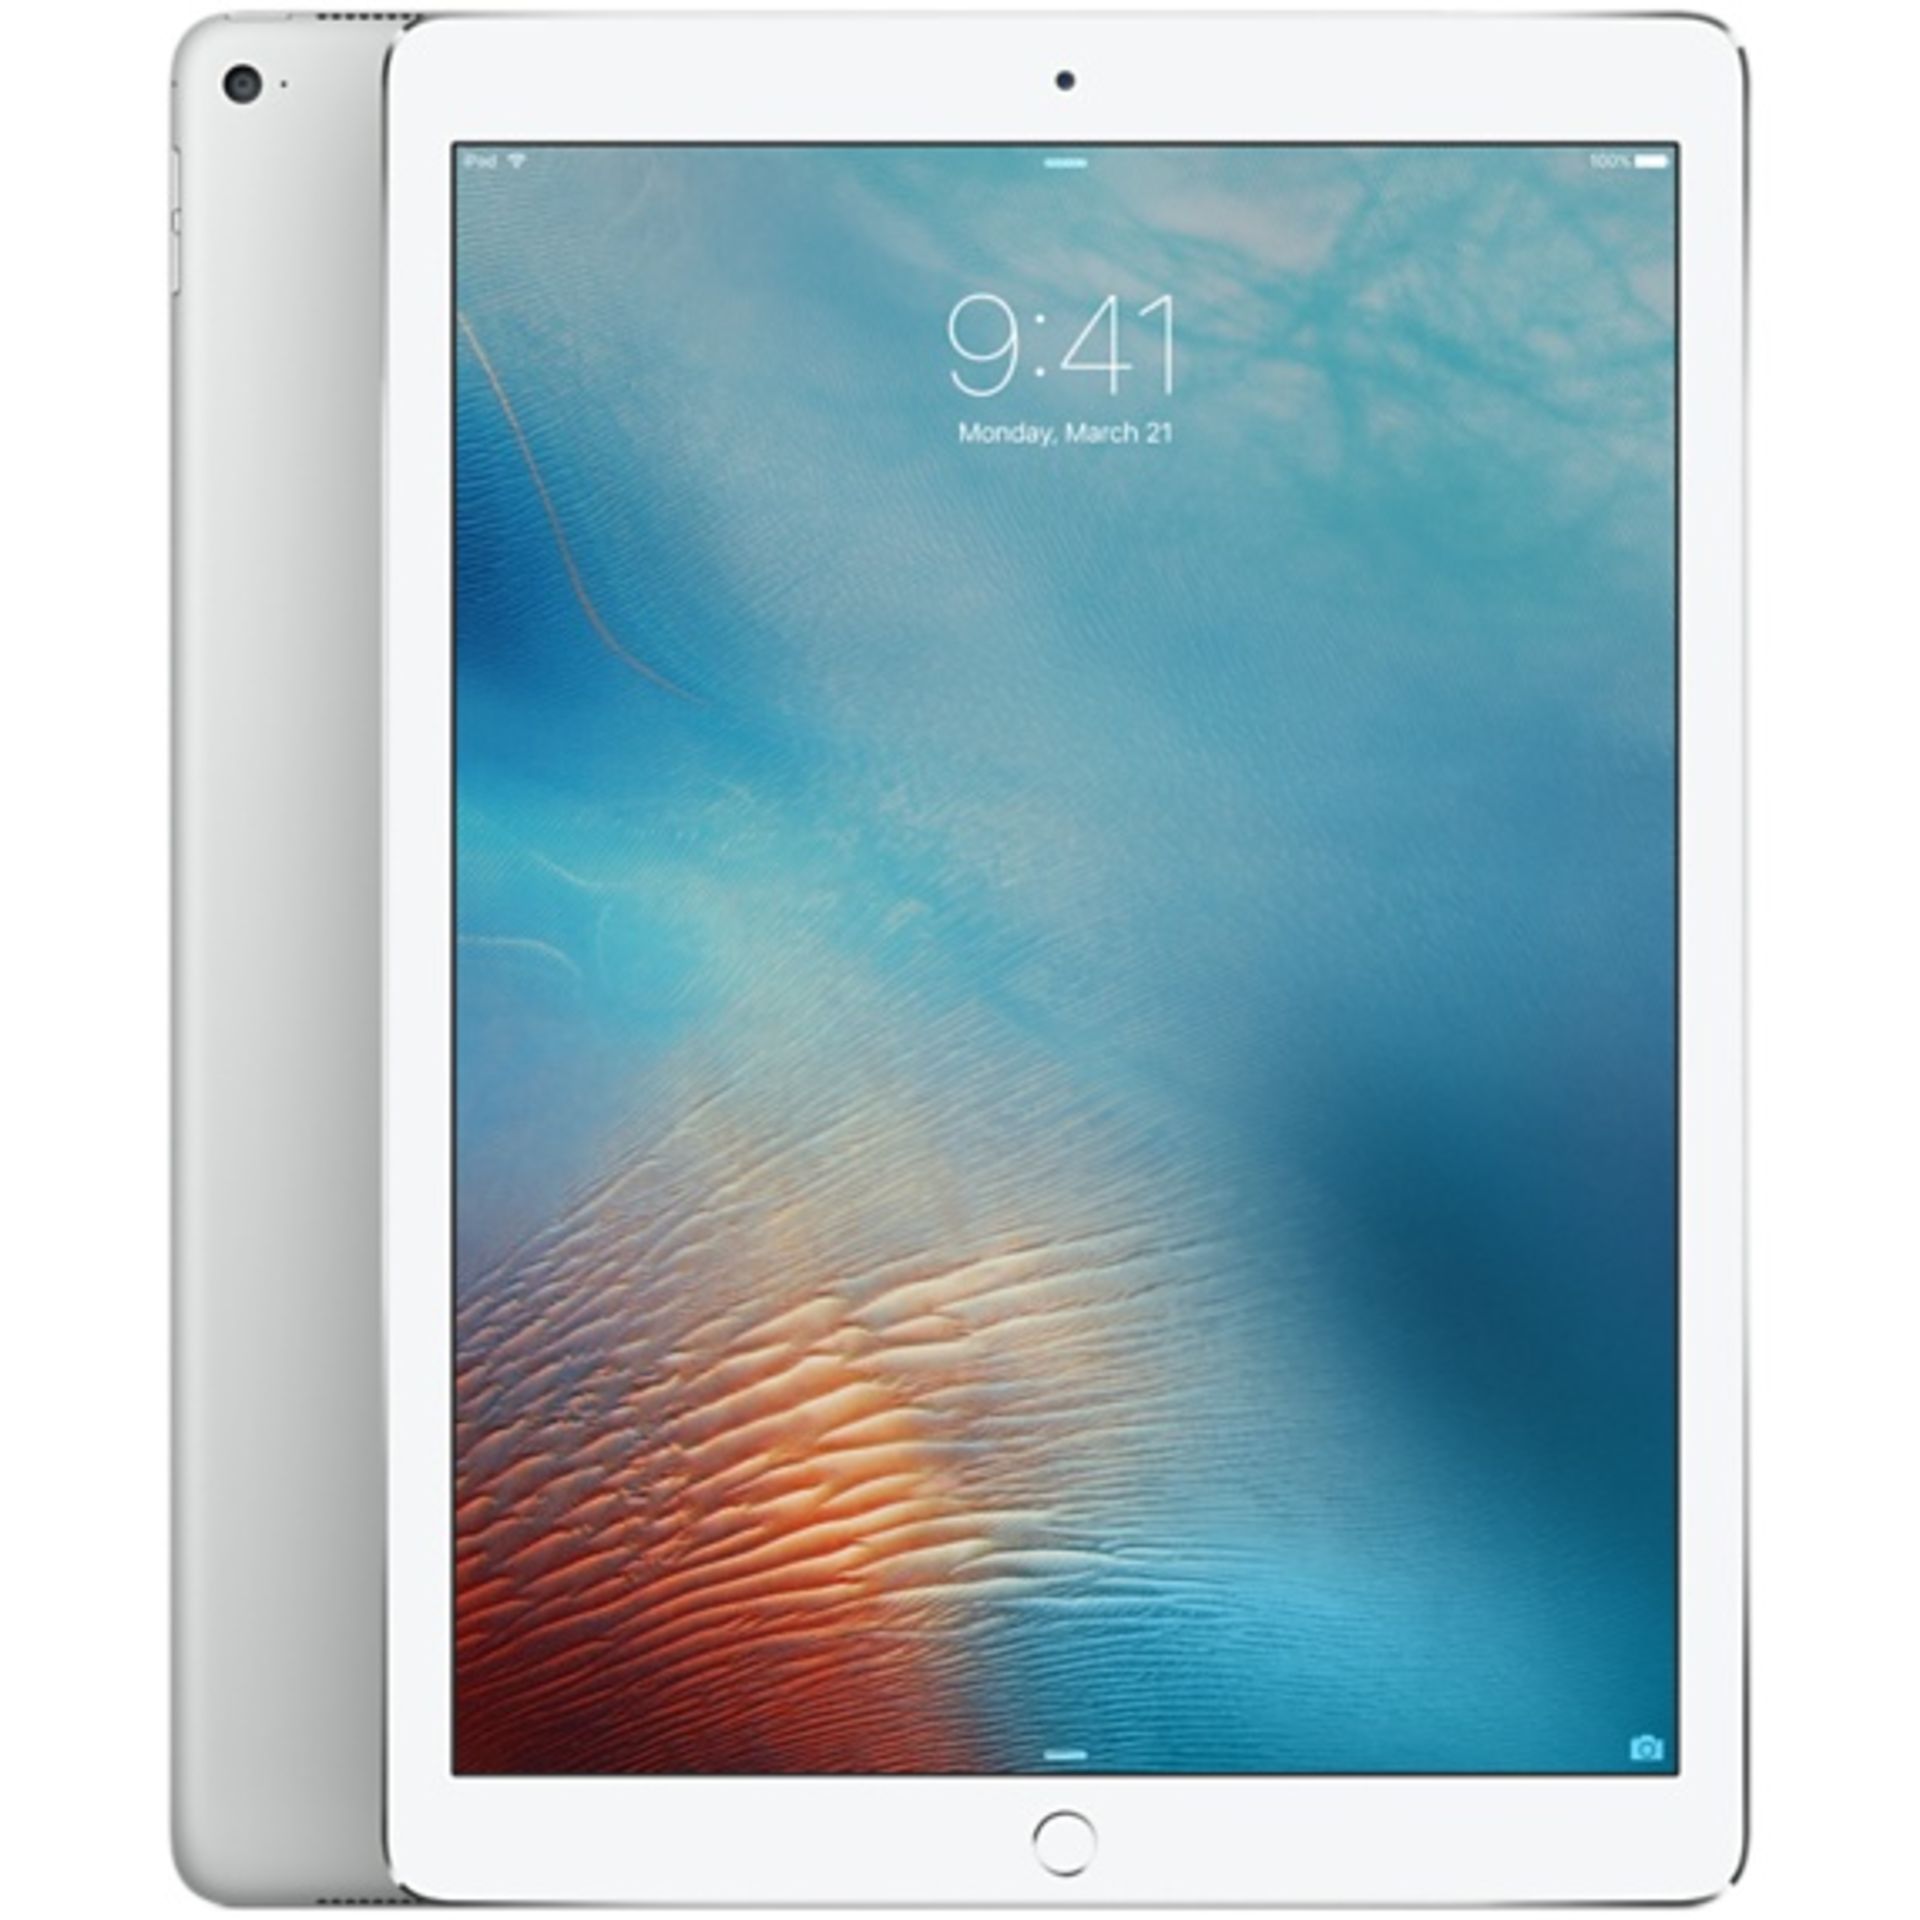 V Brand New Apple iPad Pro 12.9" Silver 32GB - Wi-Fi Only - with accessories and original box